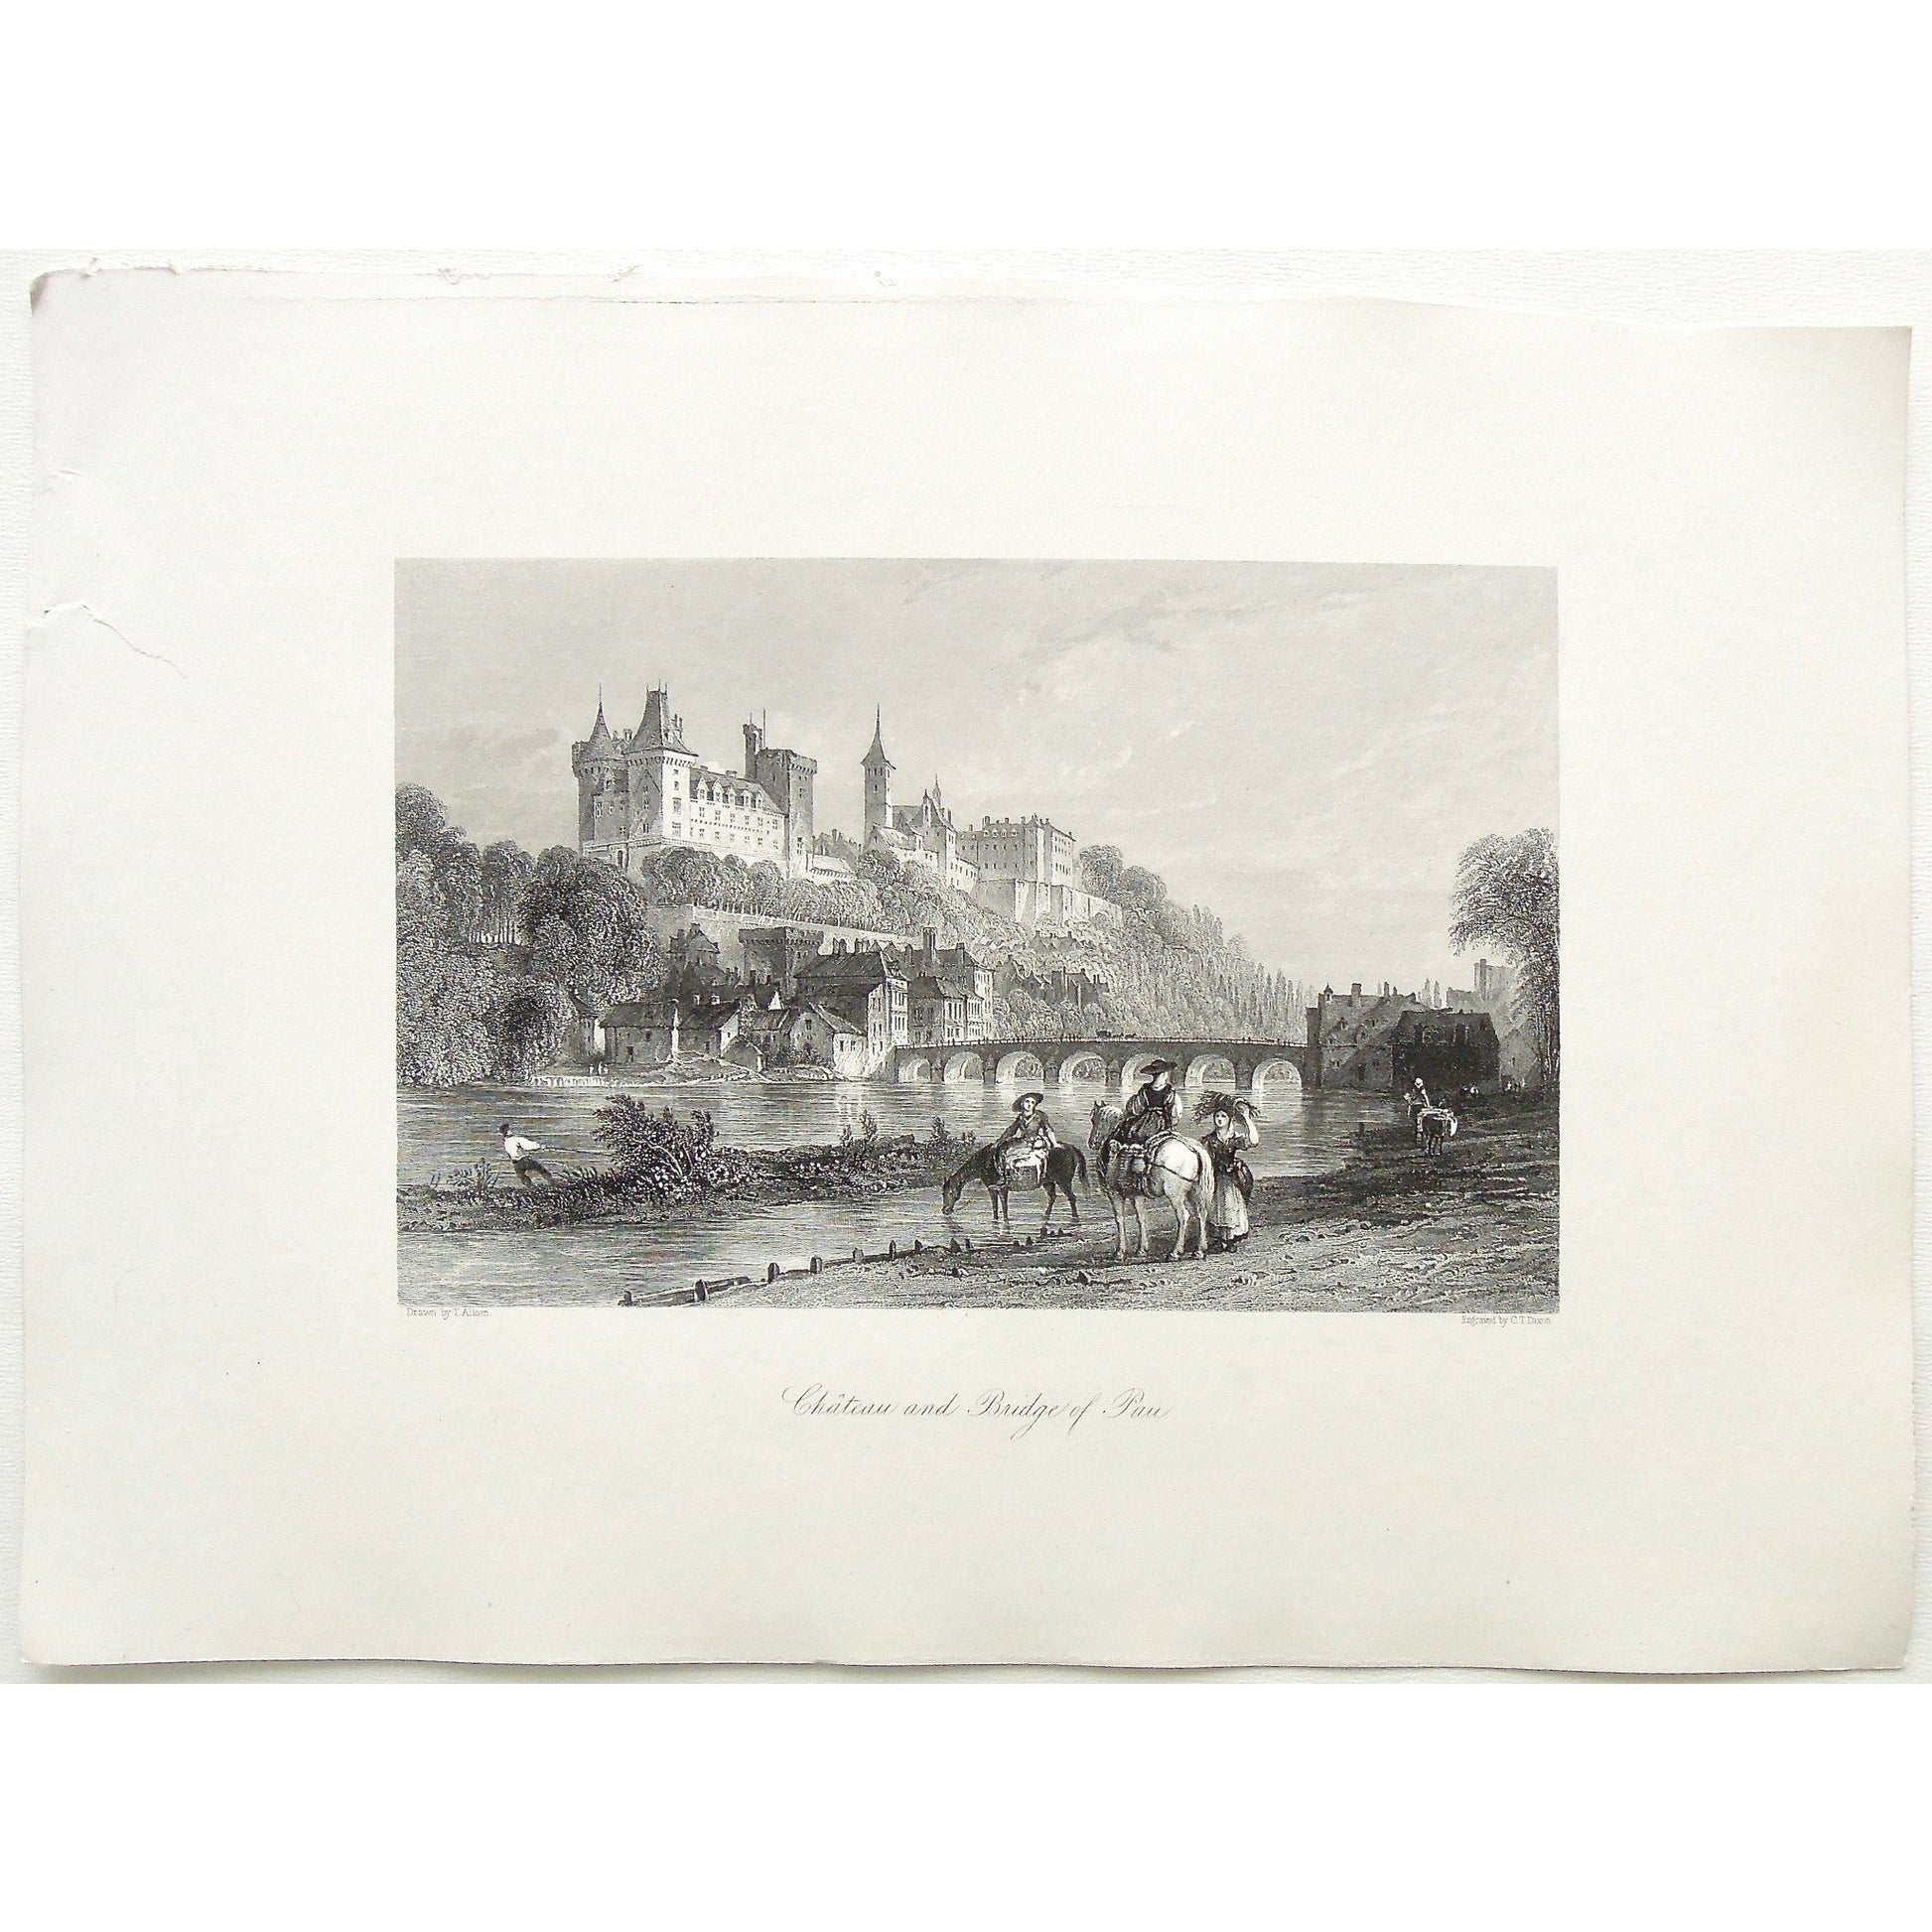 Château, Castle, Château de Pau, Castle of Pau, Pau, Bridge, Bridge of Pau, Horses, Horseback riding, Riding, Castle on a hill, Town, by the water, building, Pyrenees, France, C.T. Dixon, Dixon, Allom, Thomas Allom, T. Allom, Steel engraving, Europe Illustrated, London Printing and Publishing Company, London, 1876-79, 1876, 1879, Sherer, John Sherer, Antique Print, Antique, Prints, Vintage, Vintage Art, Vintage Prints, Art, Wall art, Decor, wall decor, design, engraving, original, authentic, Collectors, C